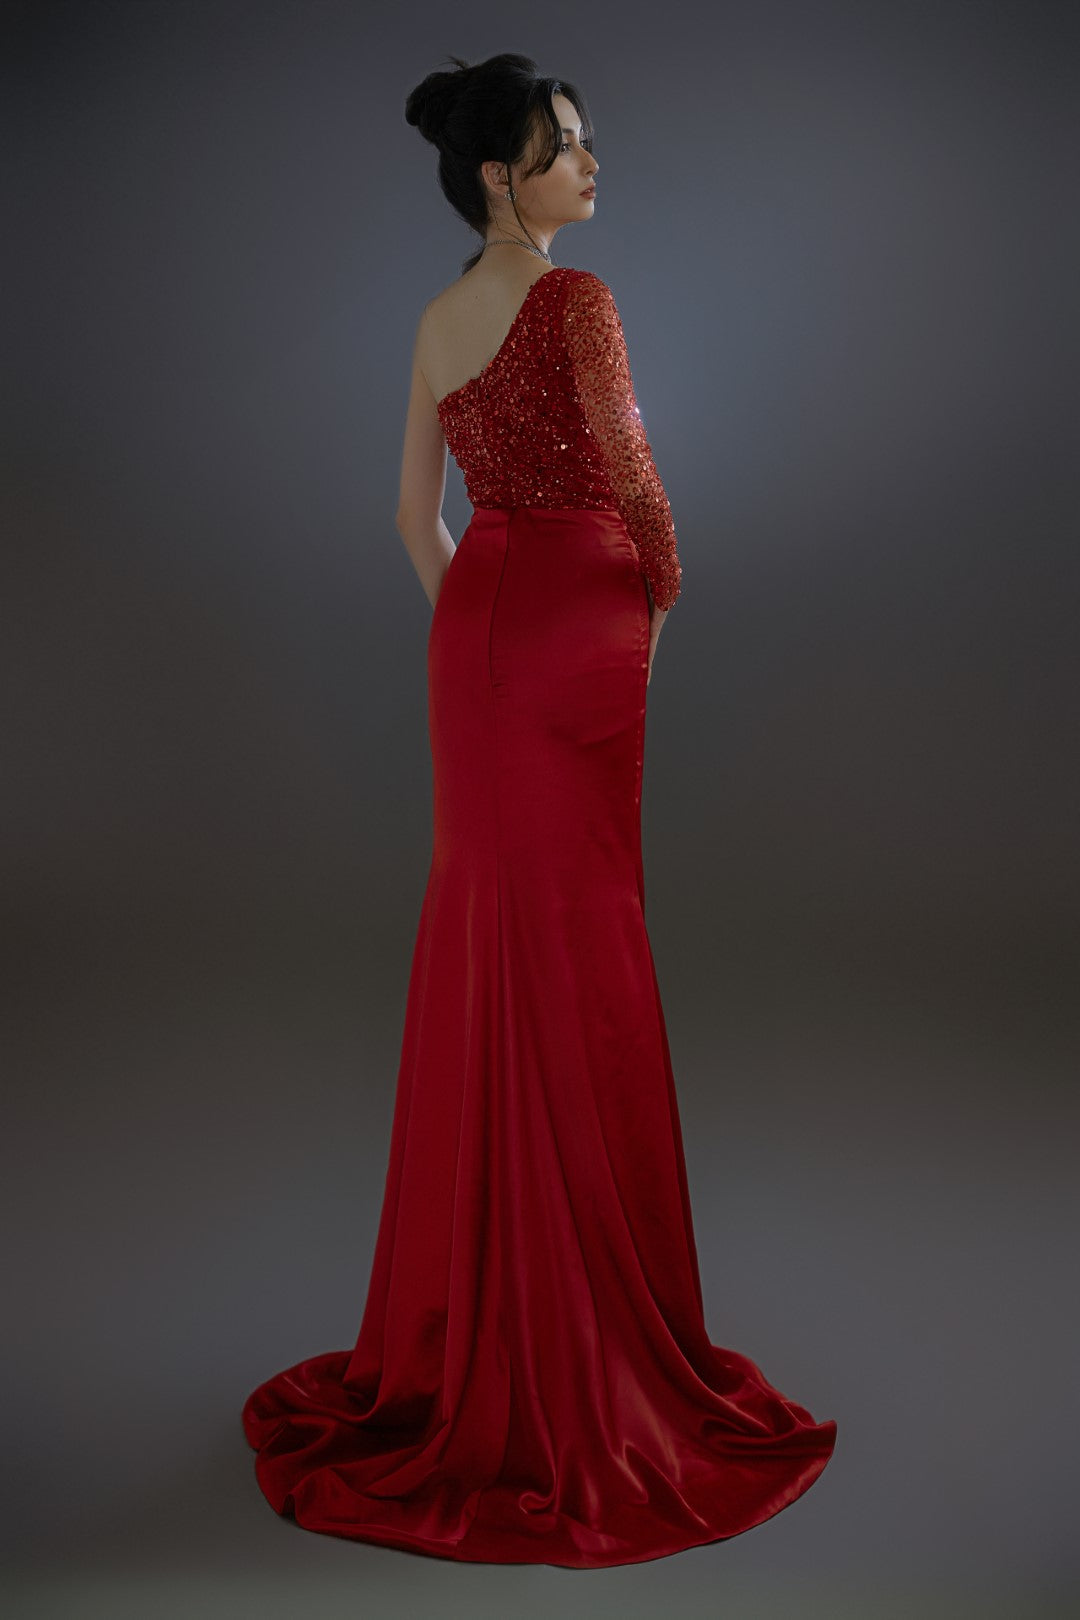 Sultry Sophistication: Sexy and Chic Mermaid Prom Dress